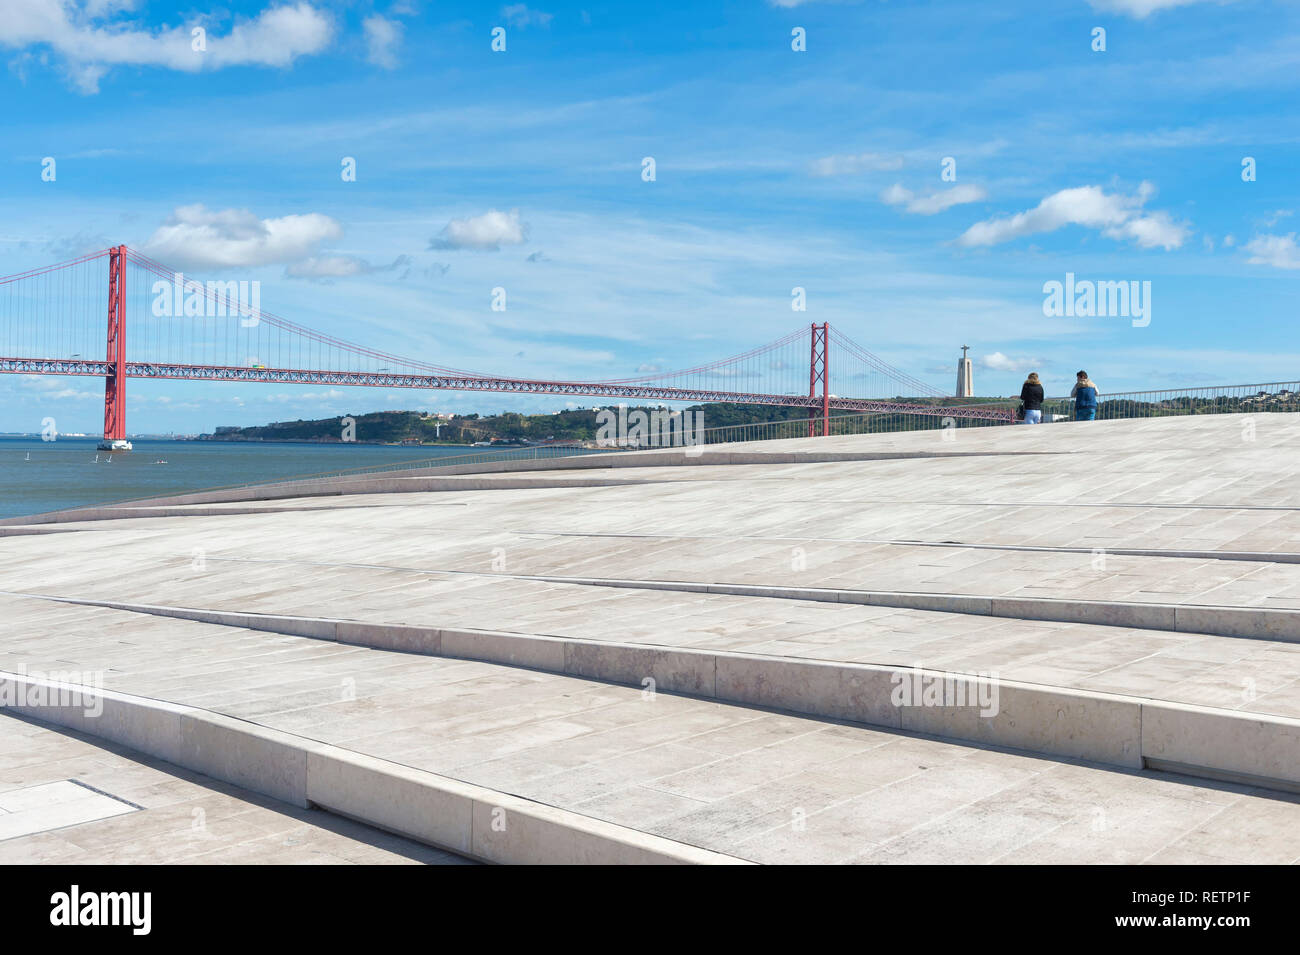 25 April Bridge, former Salazar bridge, over Tagus river viewed from the top of the MAAT, Museum of Art Architecture and Technology, Lisbon, Portugal Stock Photo